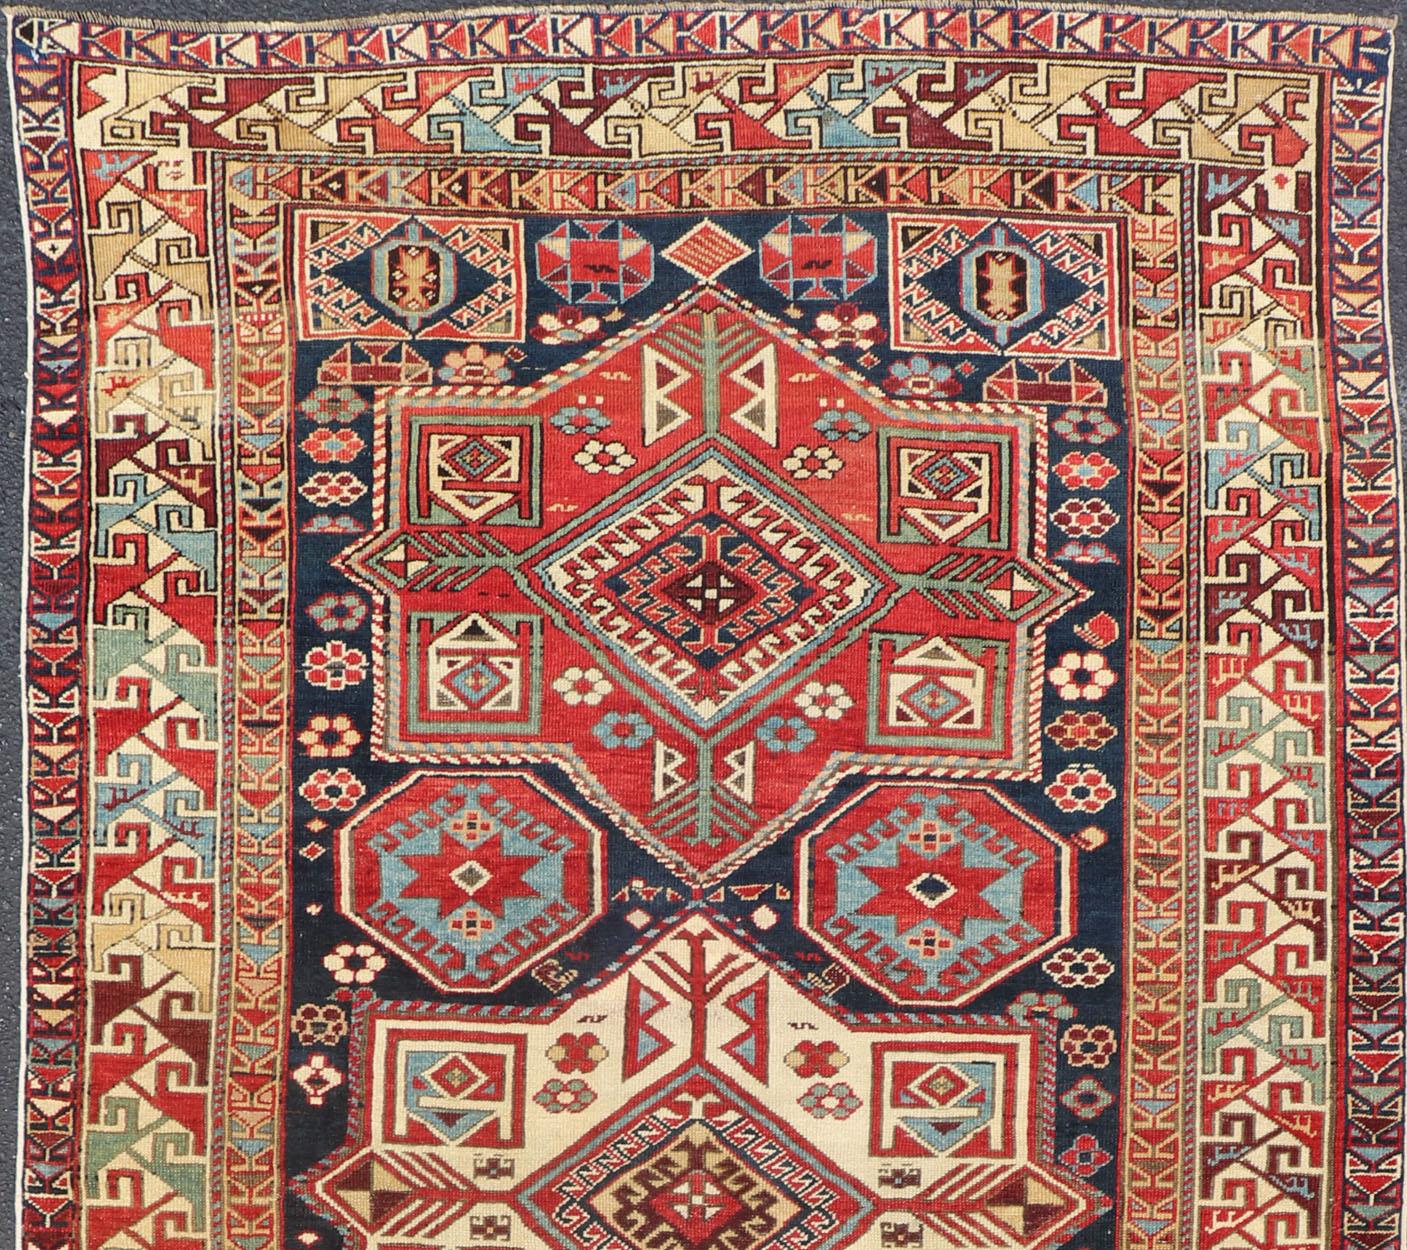 Geometric Design Kazak Caucasian Antique rug in jewel tones with layered medallions. Keivan Woven Arts / rug 18-1001, country of origin / type: Caucasus

Kazak rugs are among the most desirable Caucasian rugs. The vibrant reds, blues, and ivories